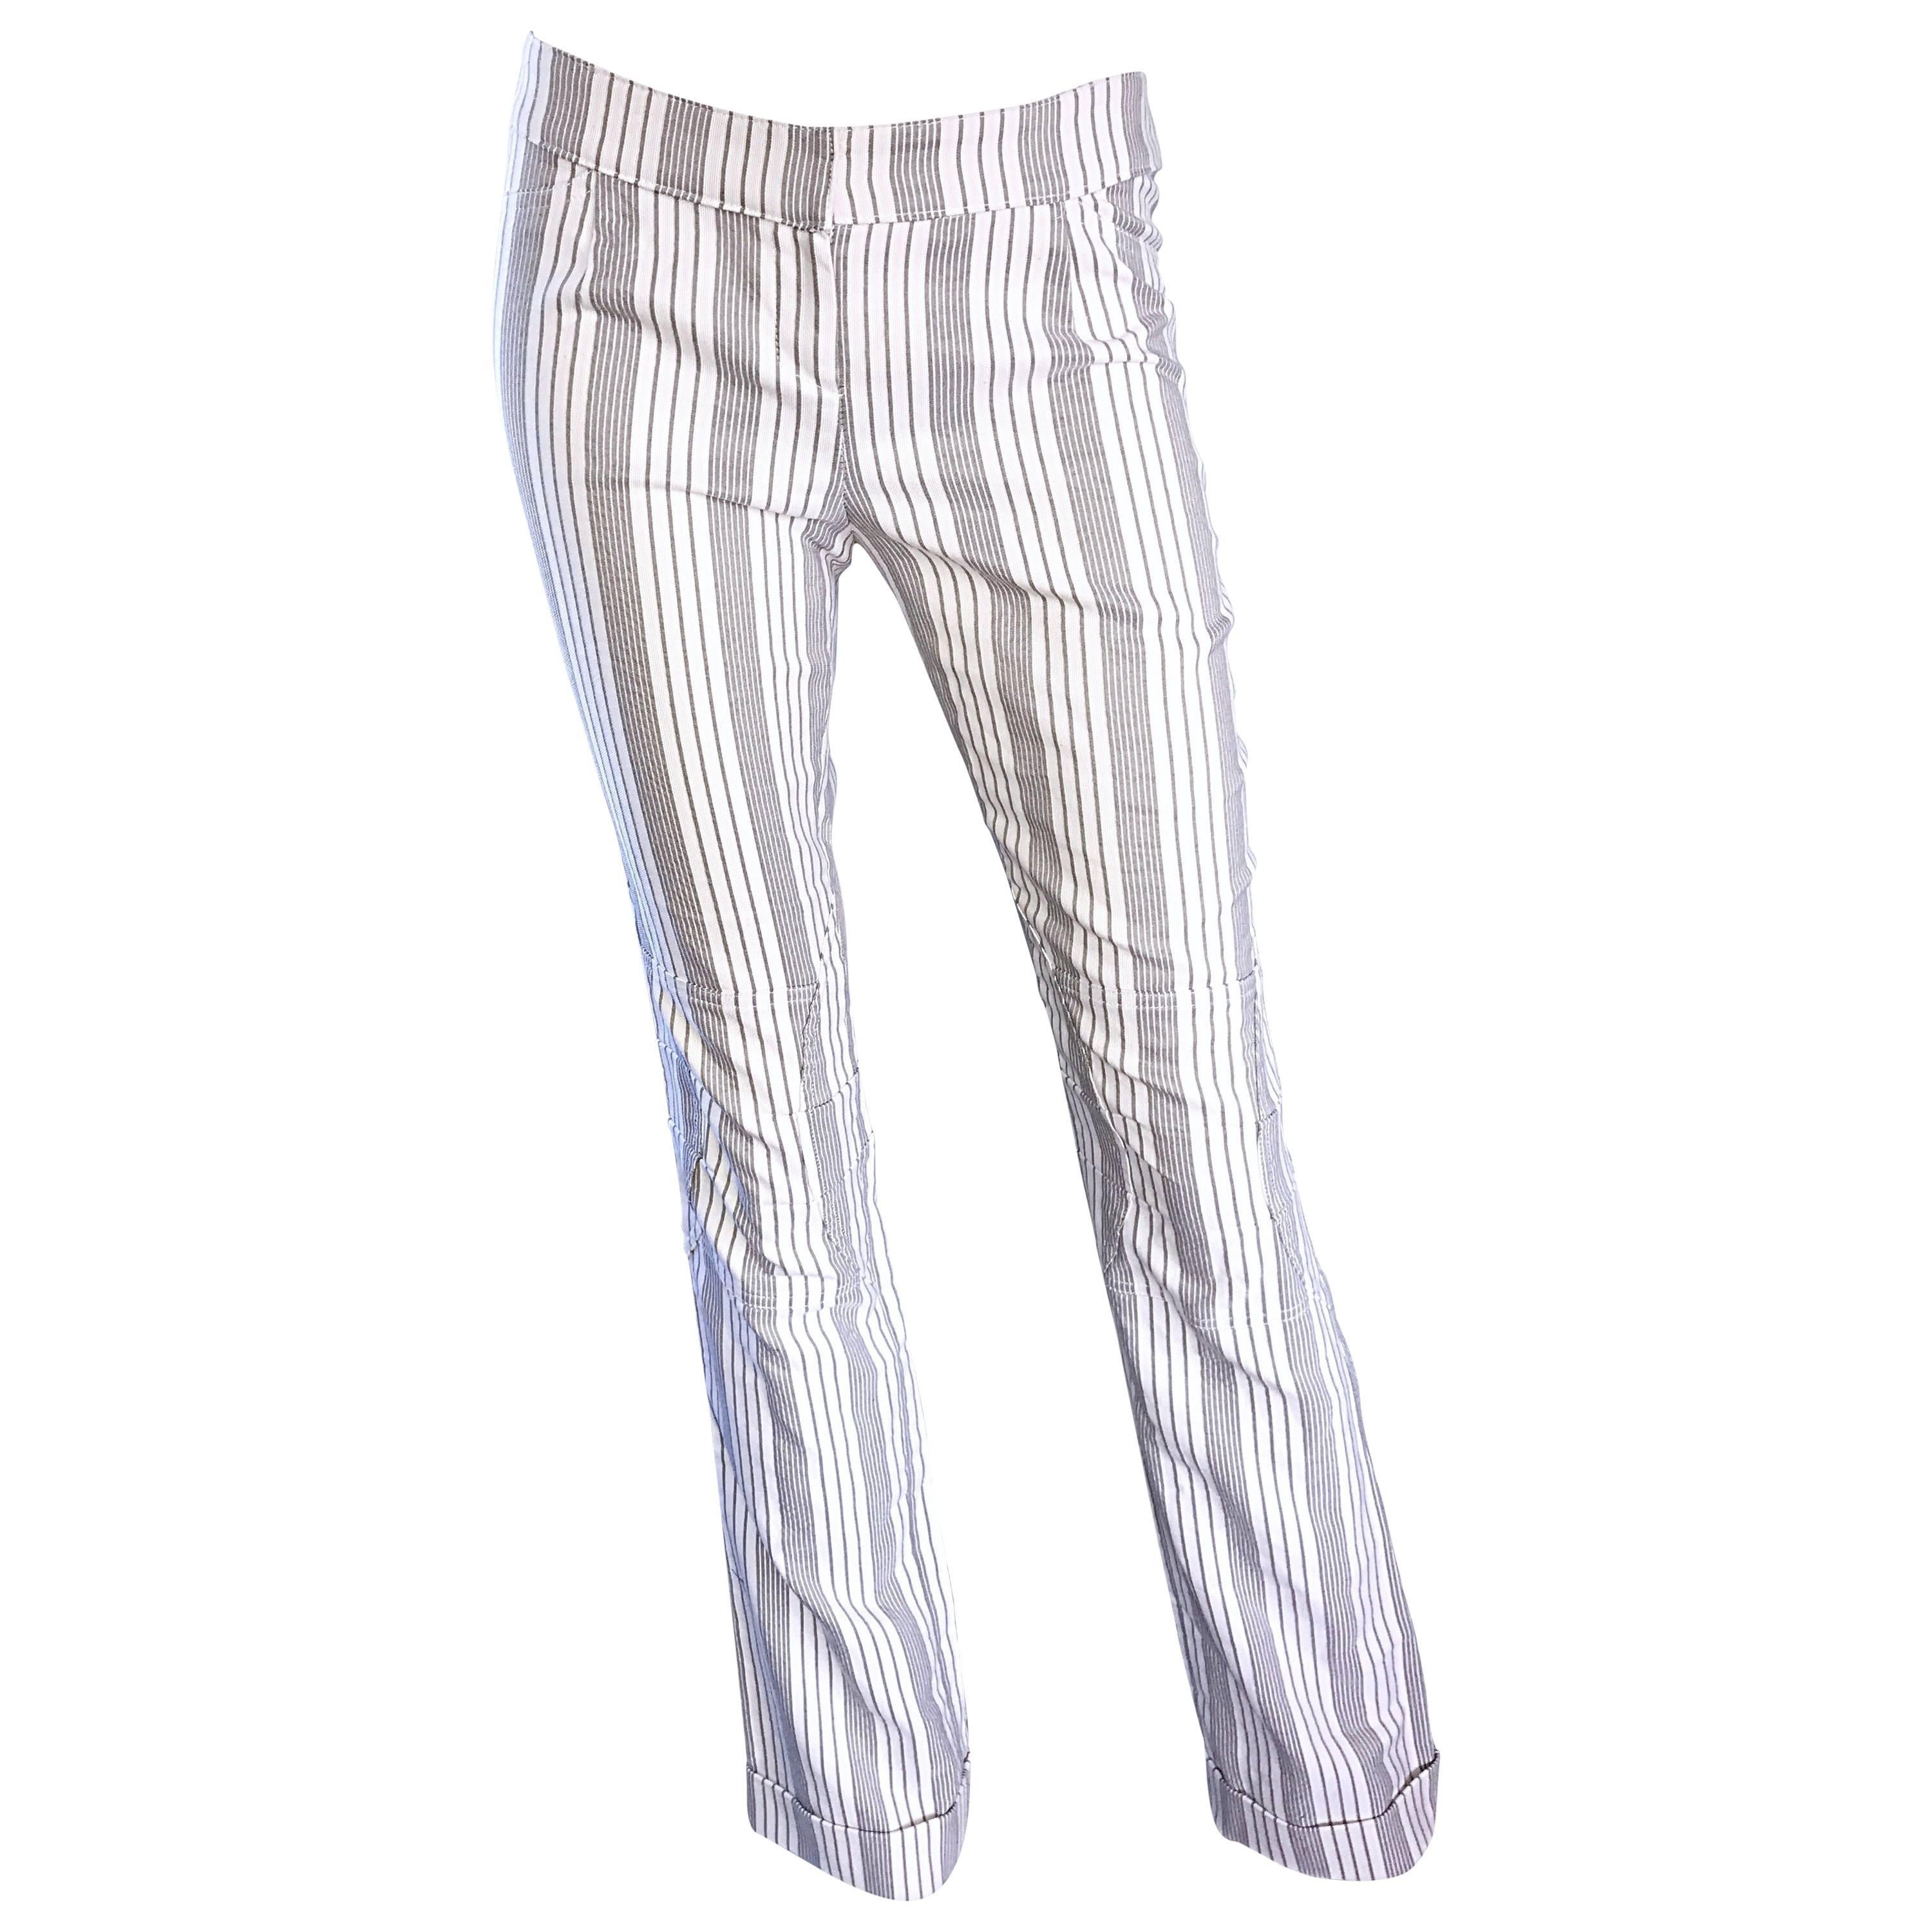 Christian Dior by John Galliano Gray and White Pinstripe Flared Leg Trousers 90s